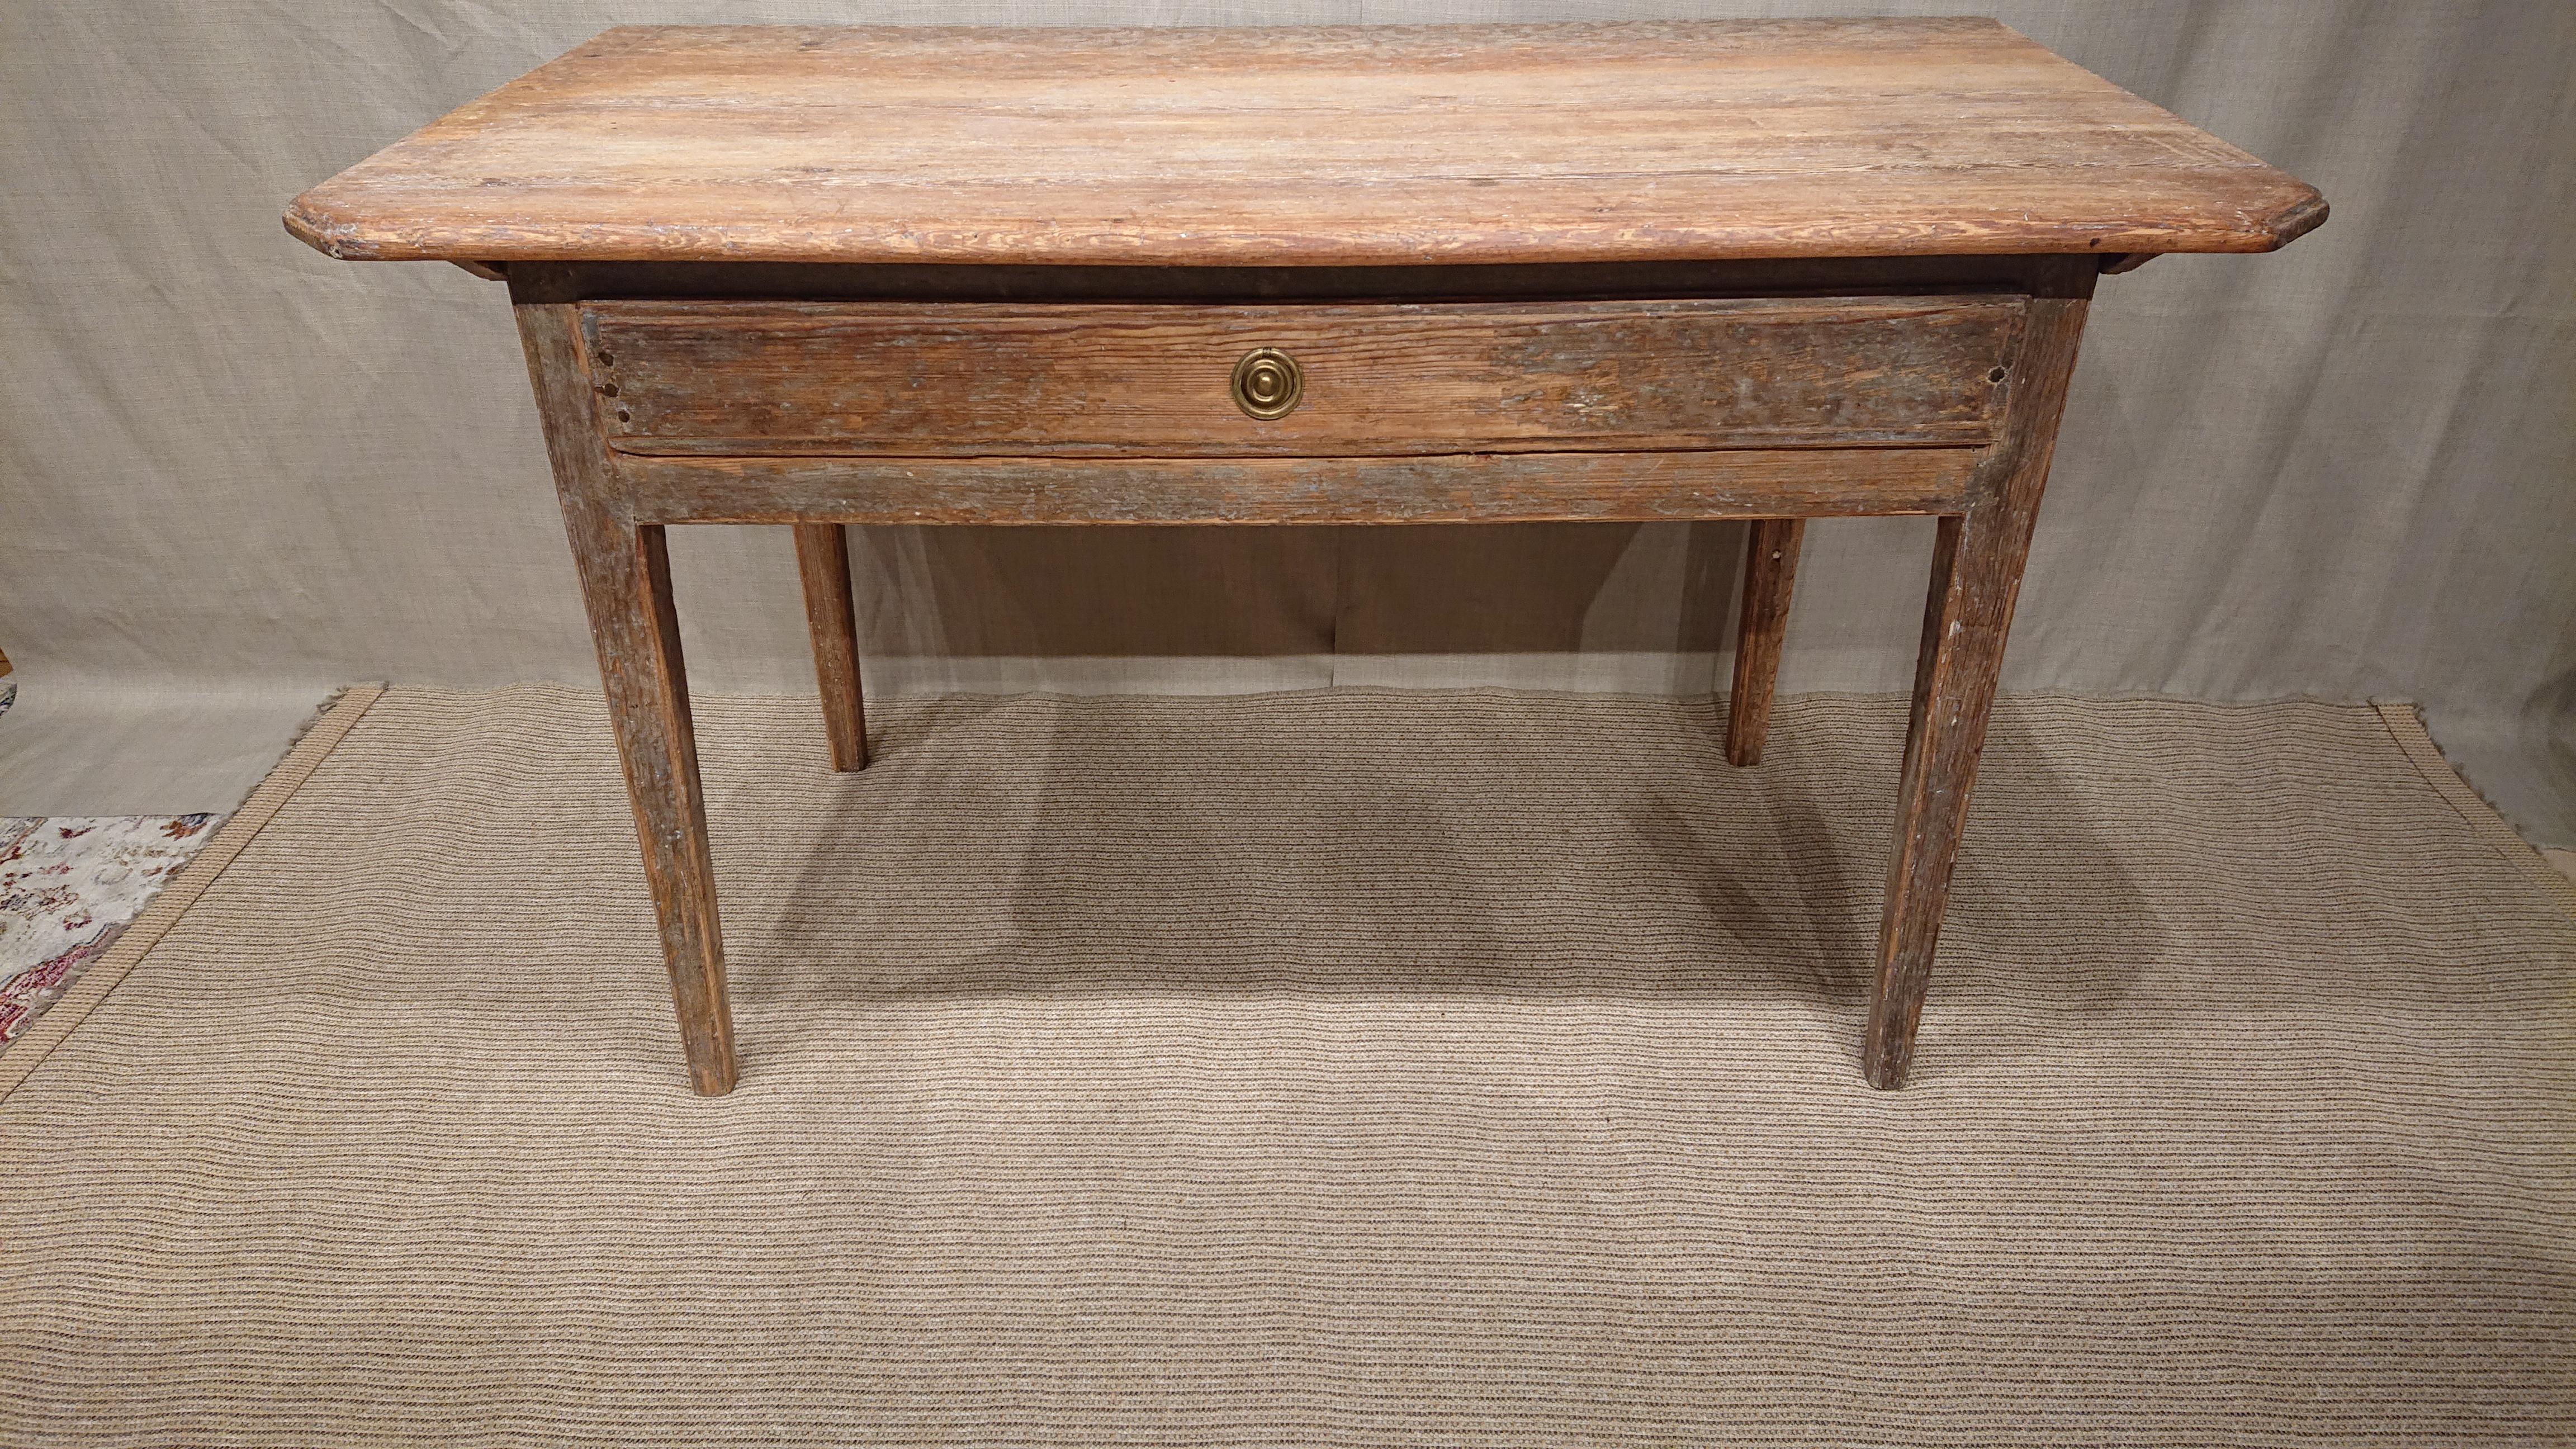 19th century Swedish Gustavian desk from Umea Vasterbotten, Northern Sweden.
Nice Gustavian desk scraped to its originalpaint.
Reeded sides.
Trace of Turtle pattern paint on the top.
Drawer bottom renovated in the early 1900s.
The drawer is